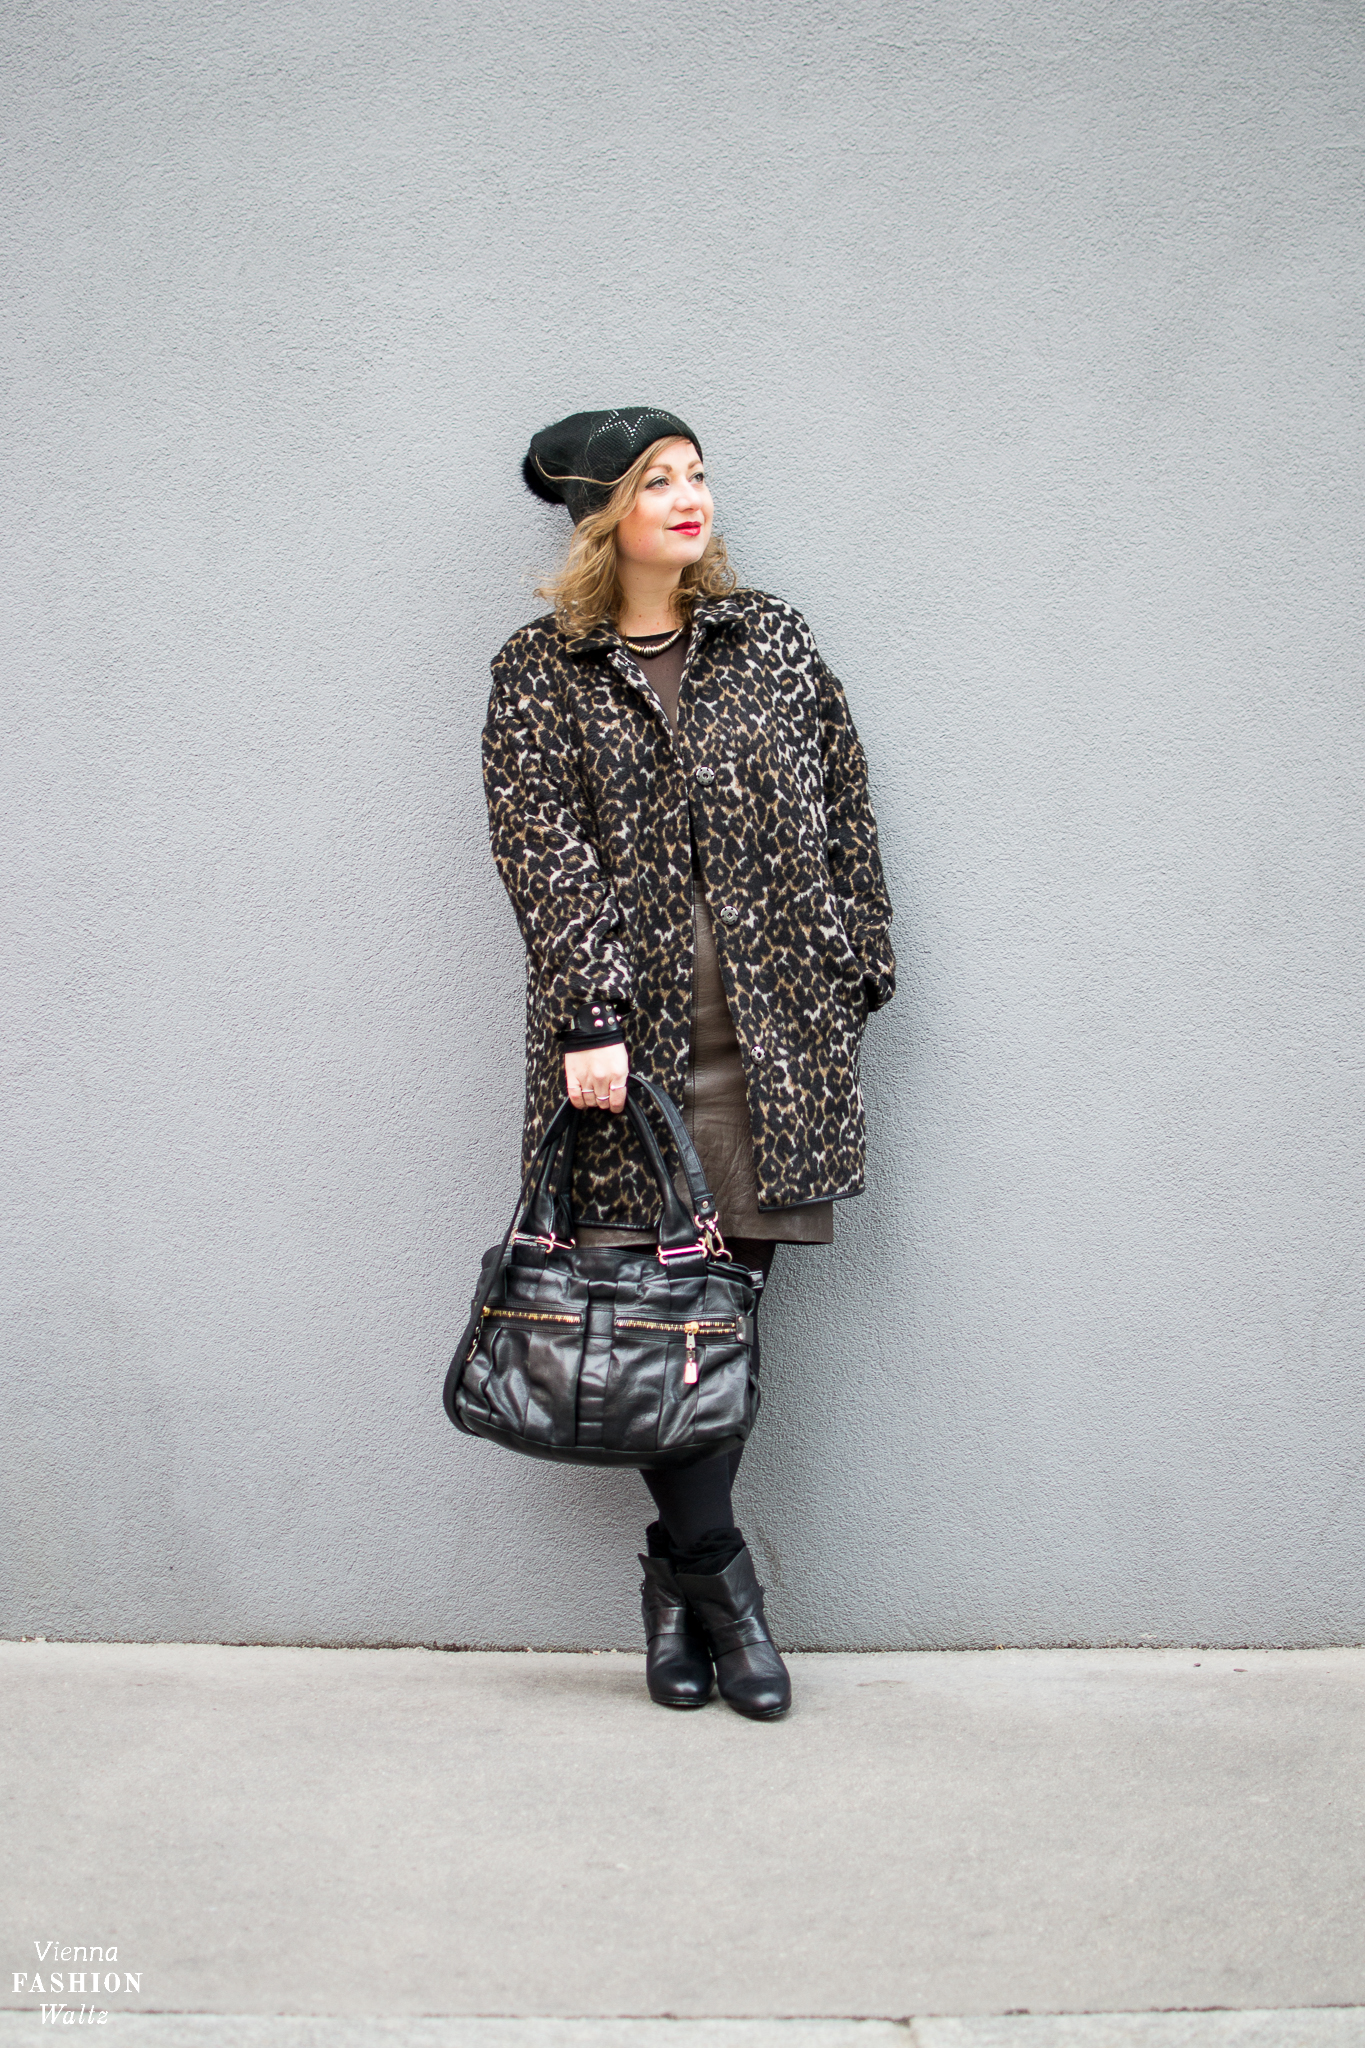 Fashion Trends - How to wear the Leopard Print! Outfit with leopard print Coat and Leather Skirt